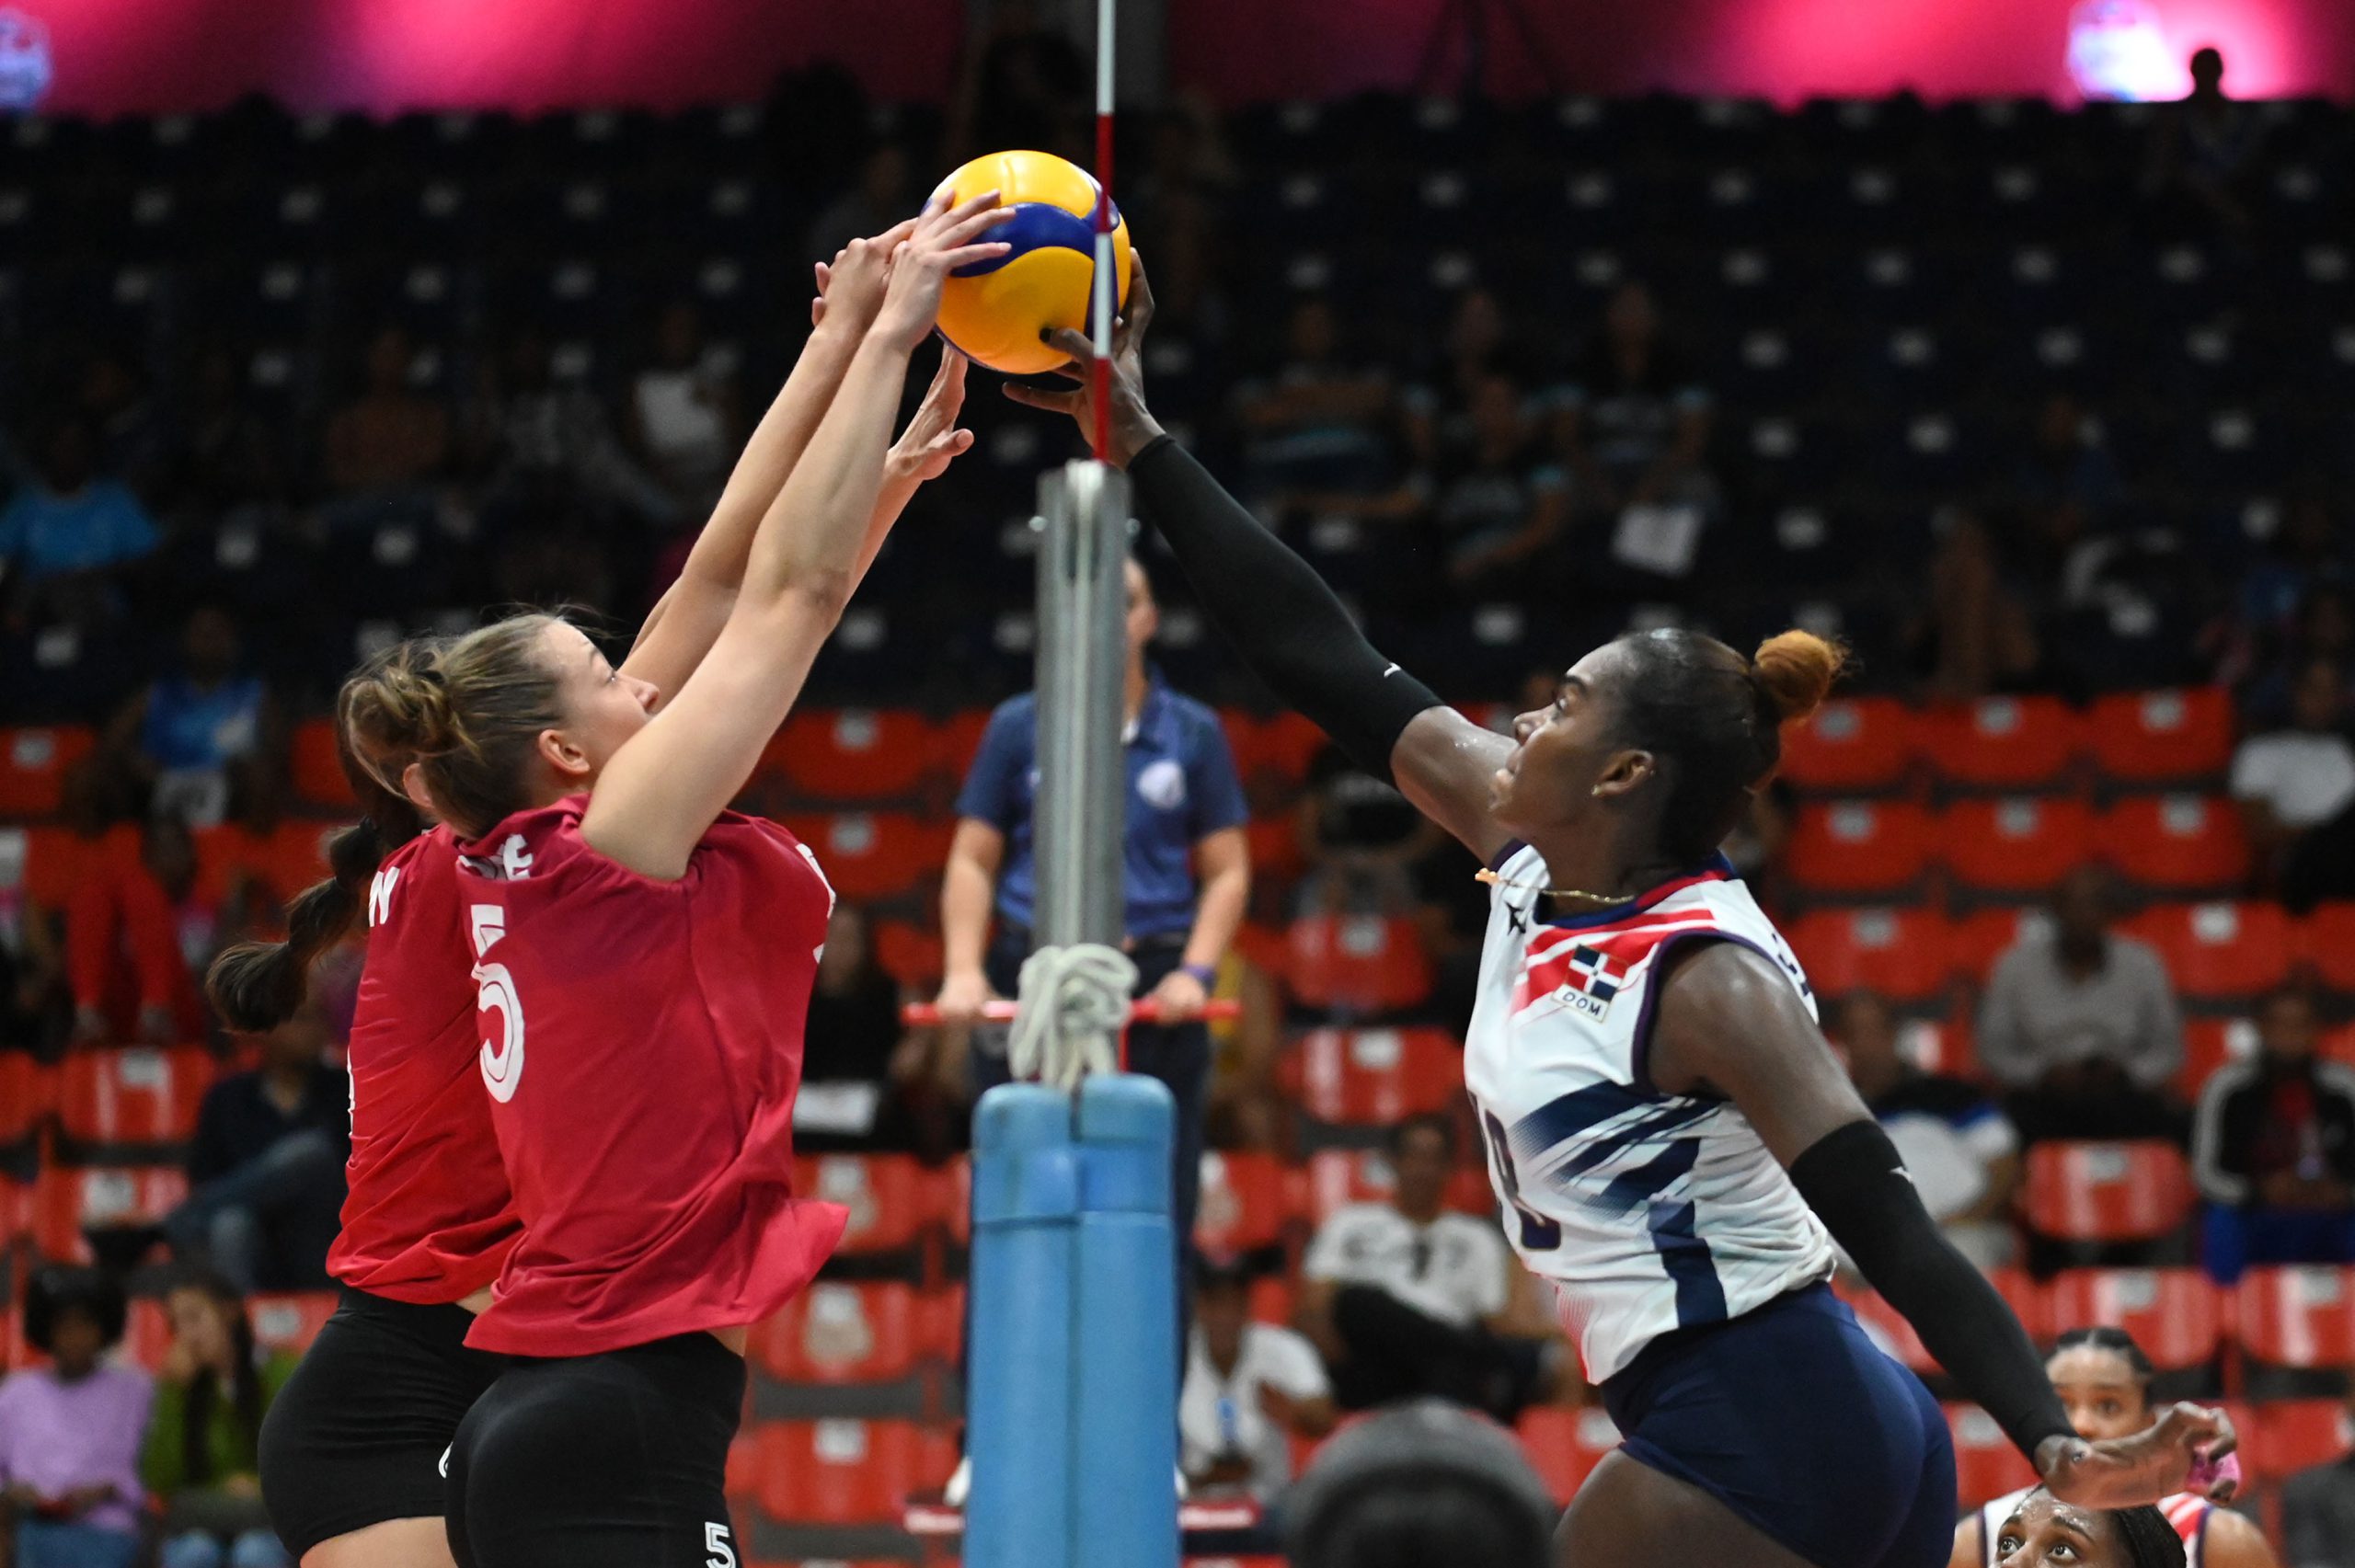 Dominican Republic secures its place in the Semifinal